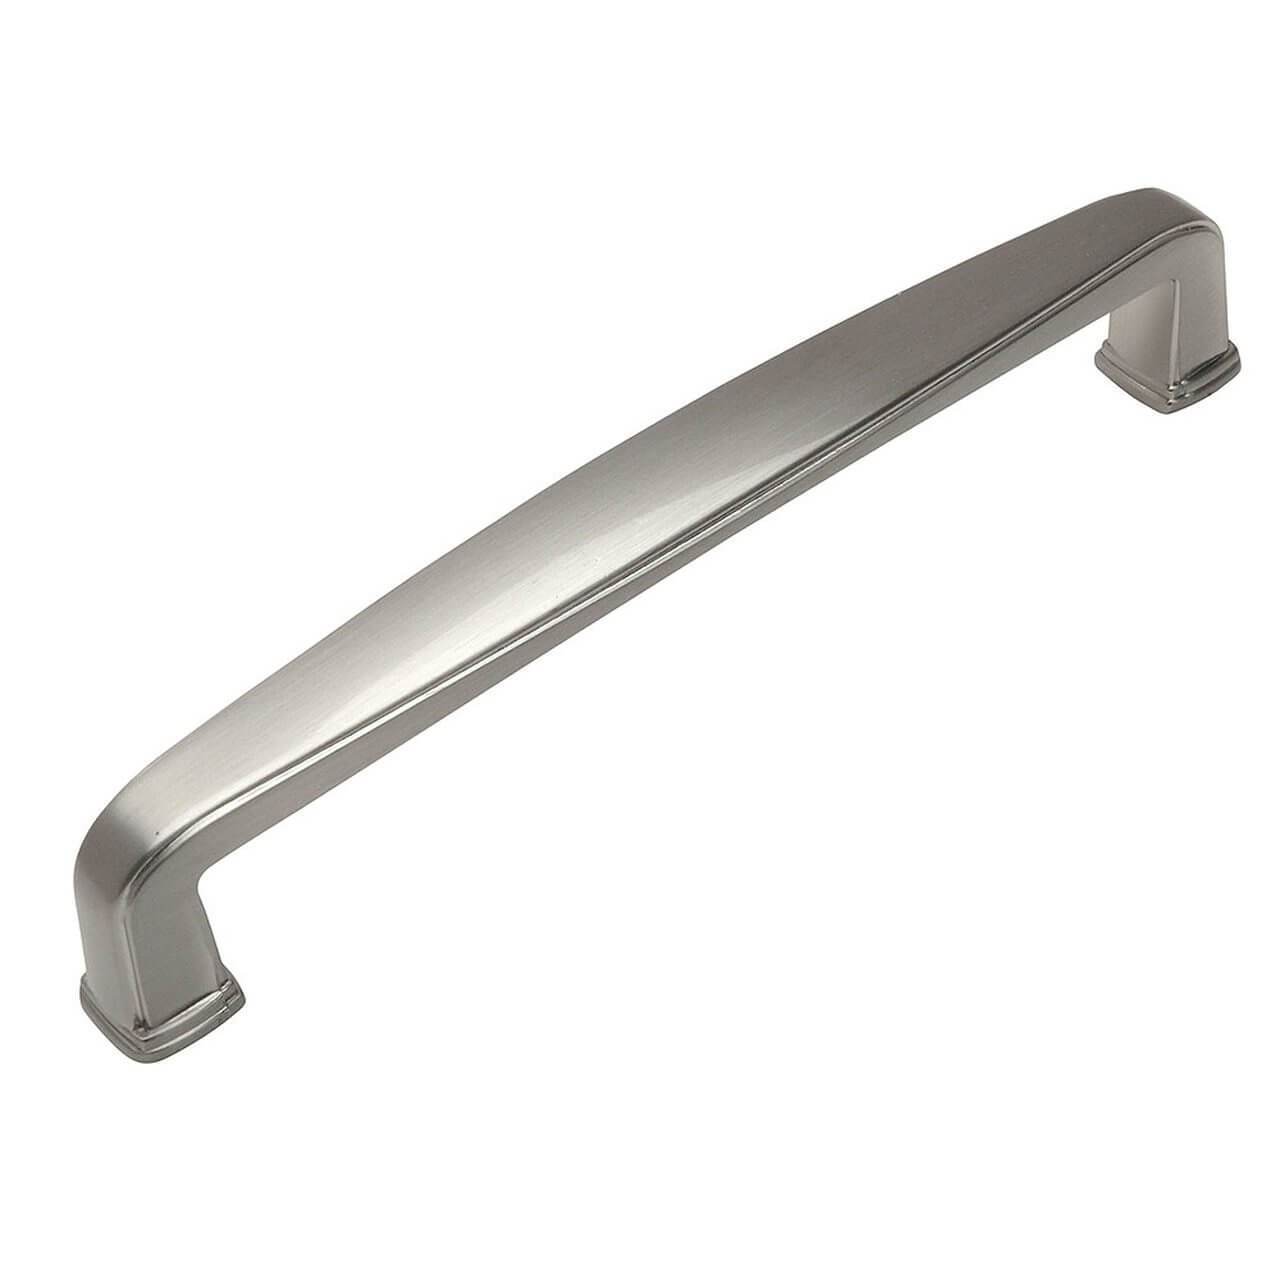 Subtle wide cabinet pull in satin nickel finish with five inch hole spacing